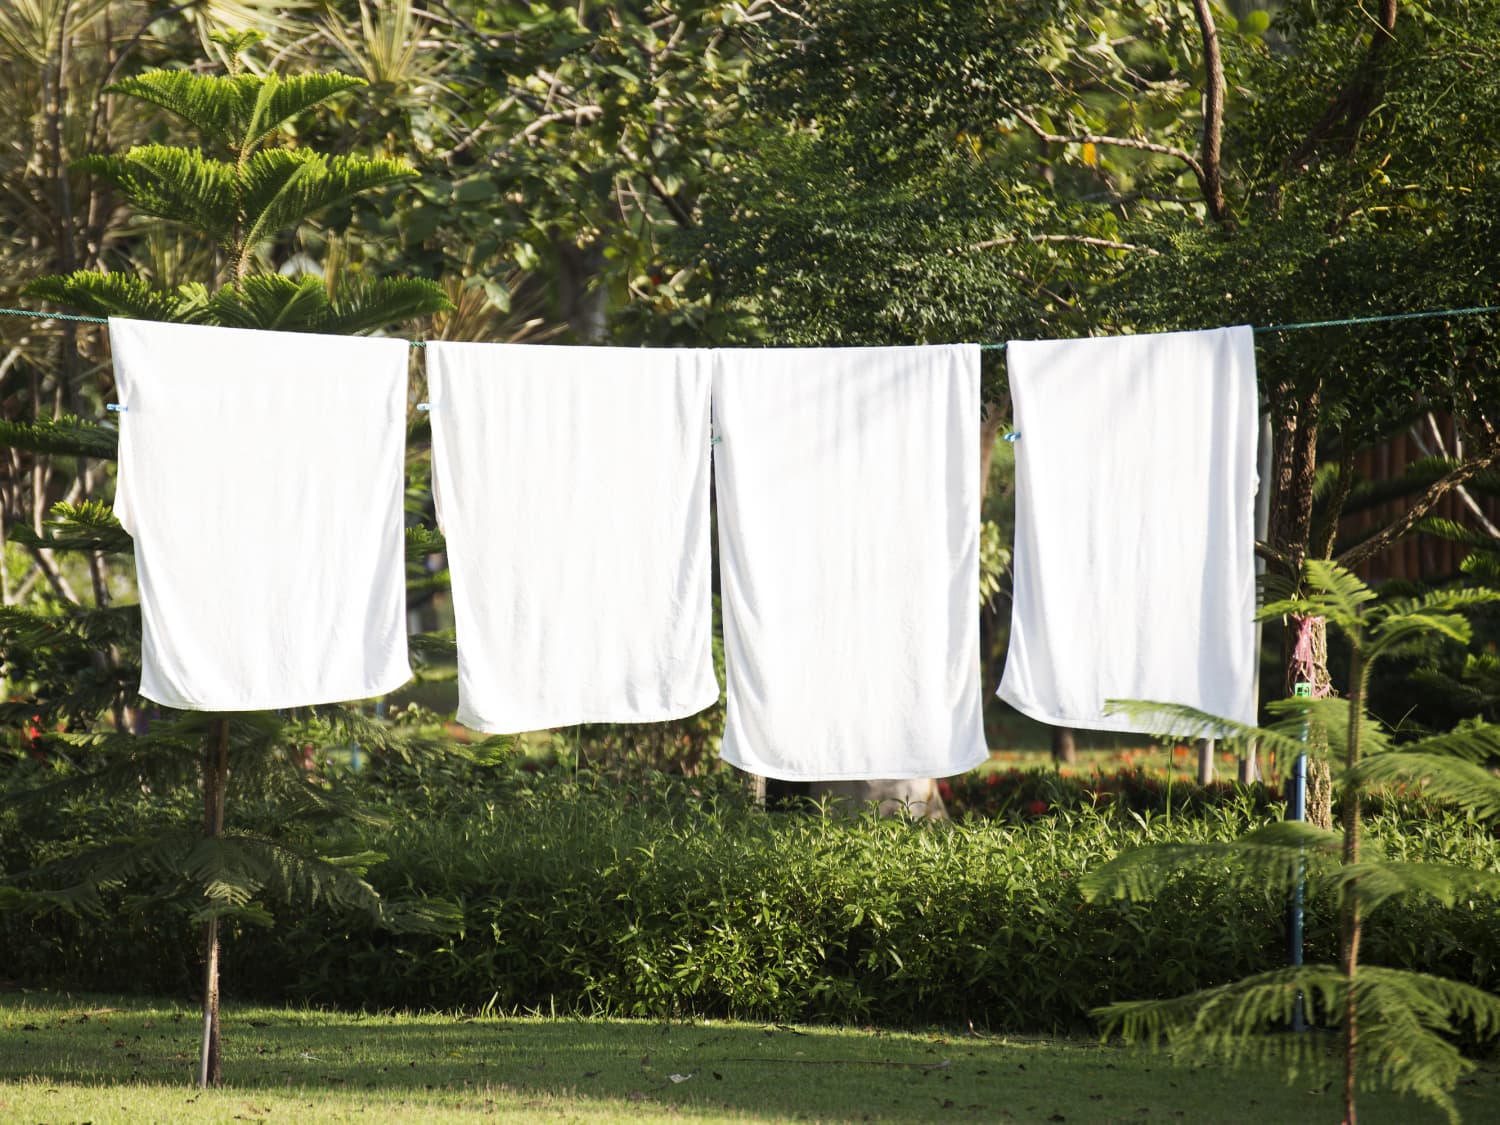 Two towels hanging on the Clothes line.Clean white towels on a